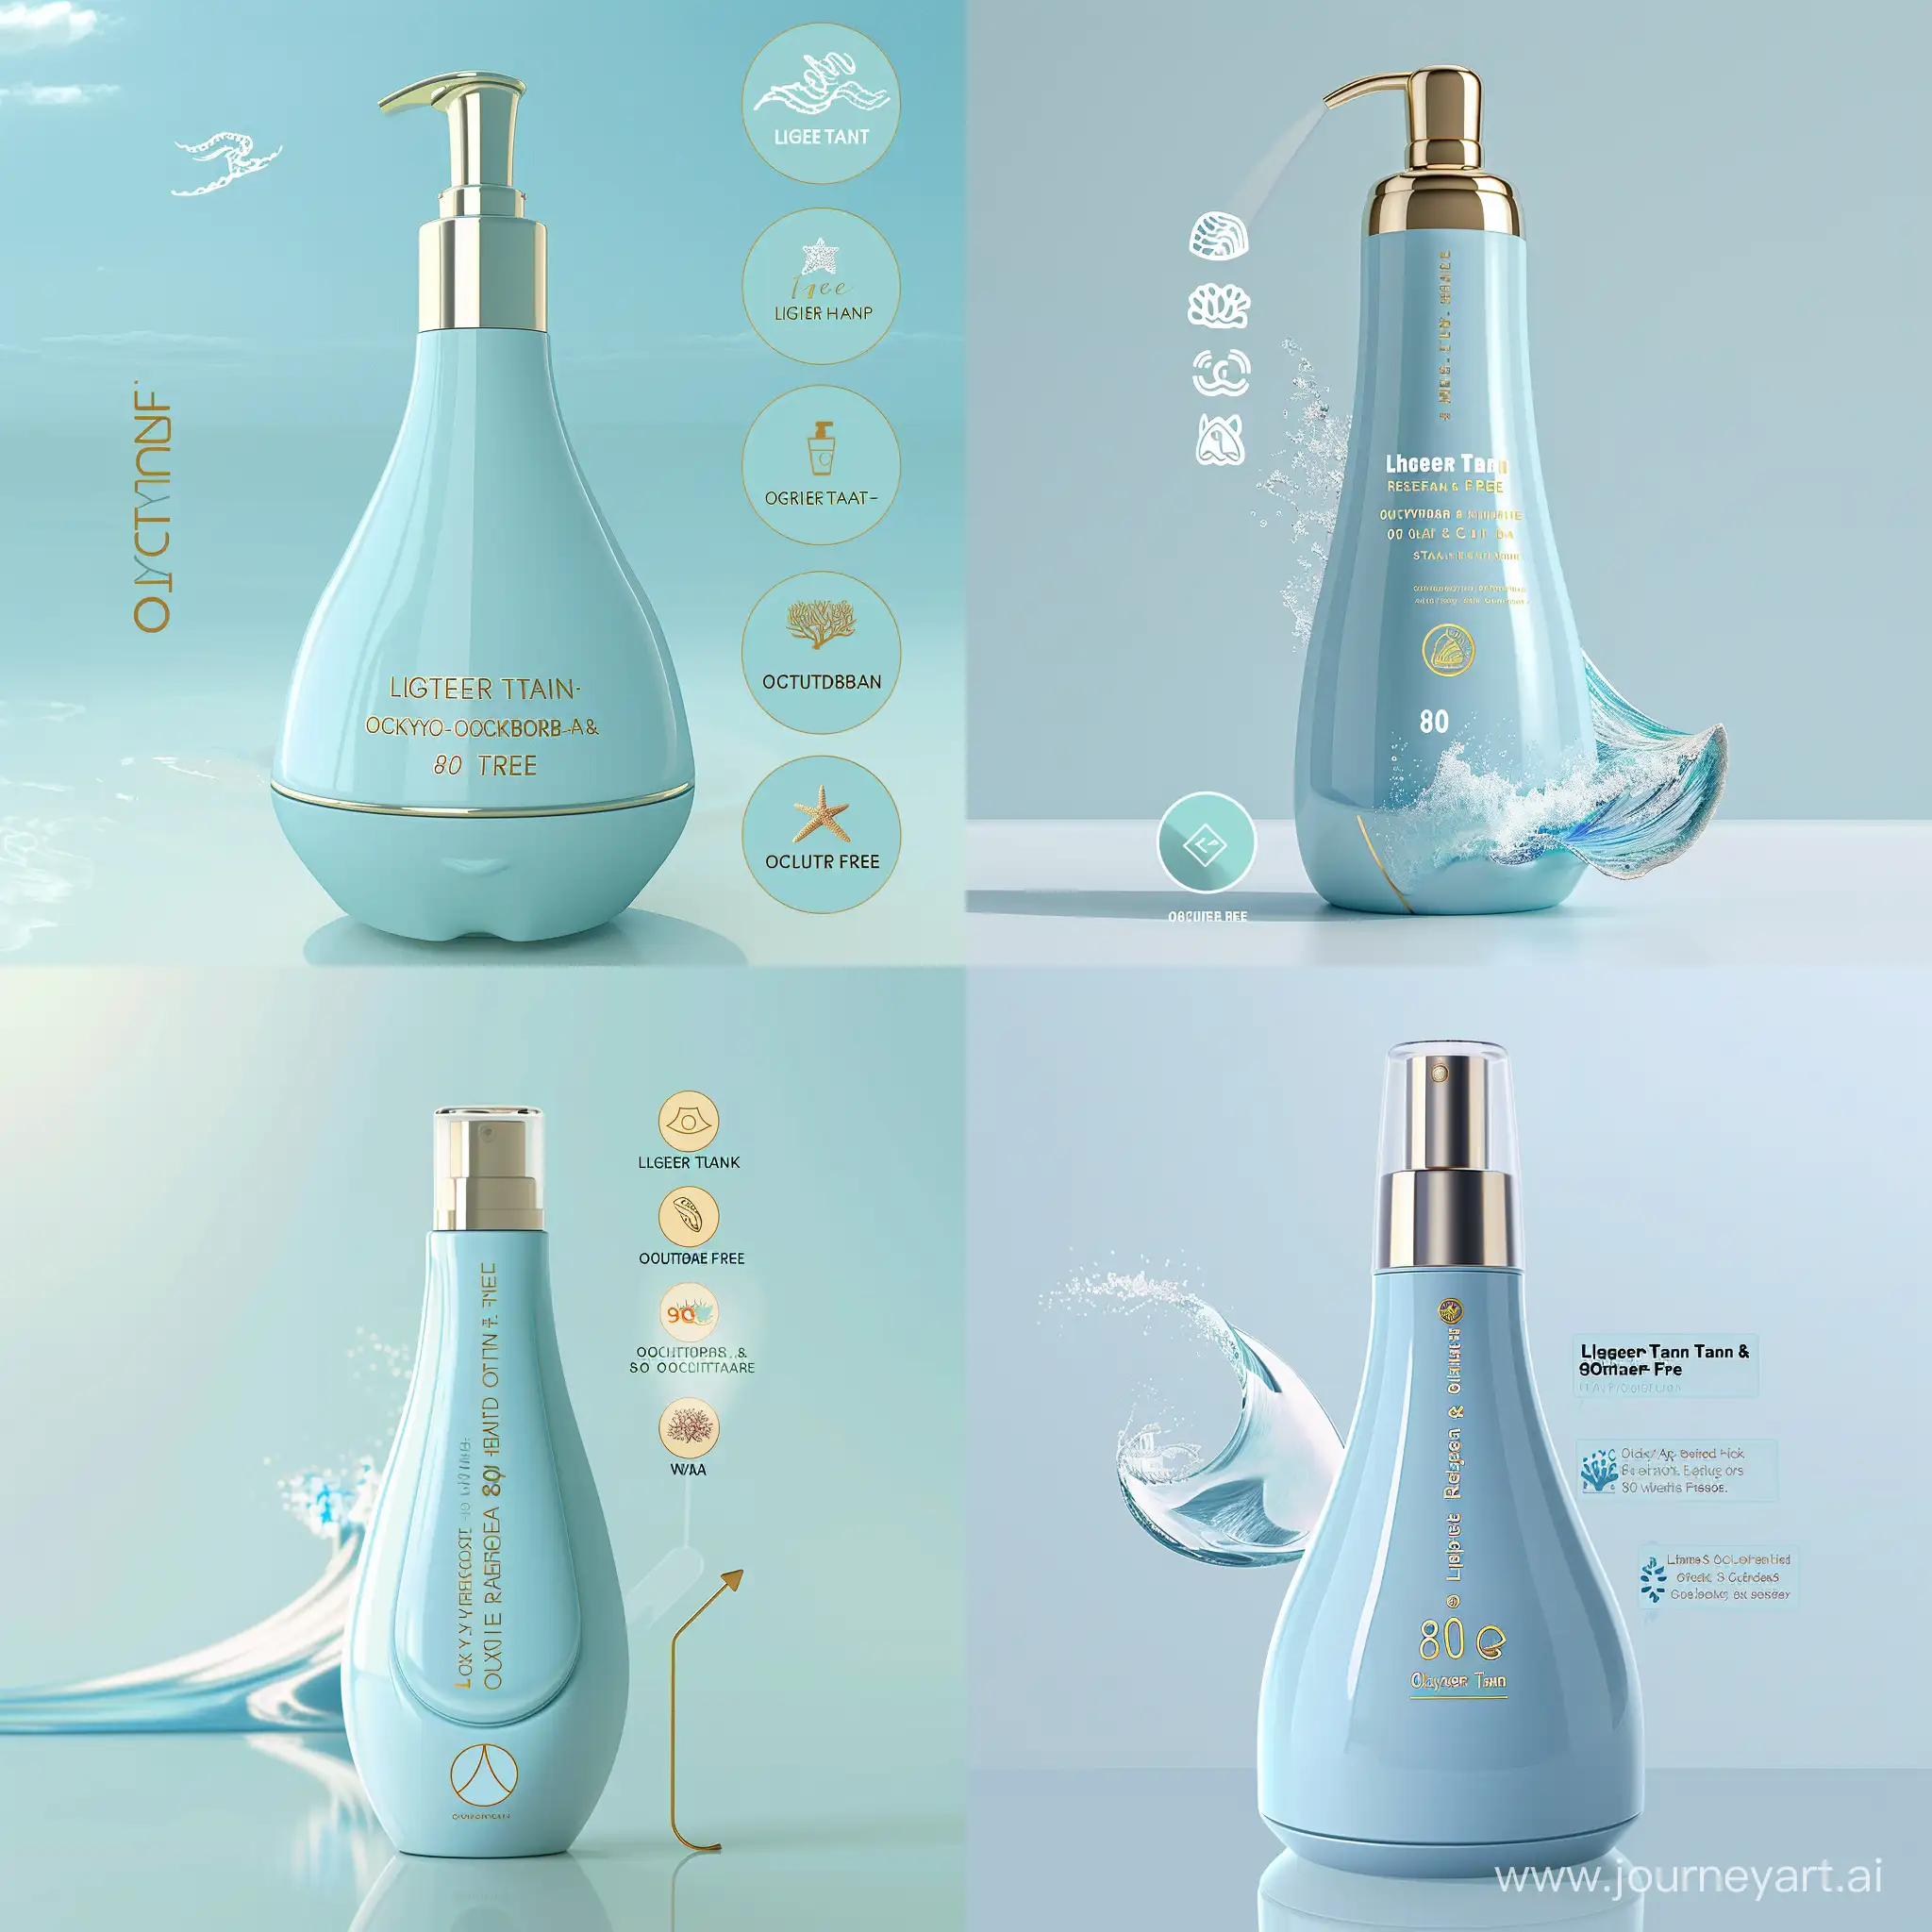 imagine a sleek, baby blue bottle. The bottle should have a dispenser and look luxorious and synoblize pleasure. The labels on the bottle should be "Lighter-Than-Air" , "Water-Resistant (80 minutes)", "Oxybenzone & Octinoxate free." They should be wrtitten in gold color. Additionally, include symbols representing the product being eco-friendly, cruelty-free, and vegan attributes. Also add a small image of a wave and a coral reef

